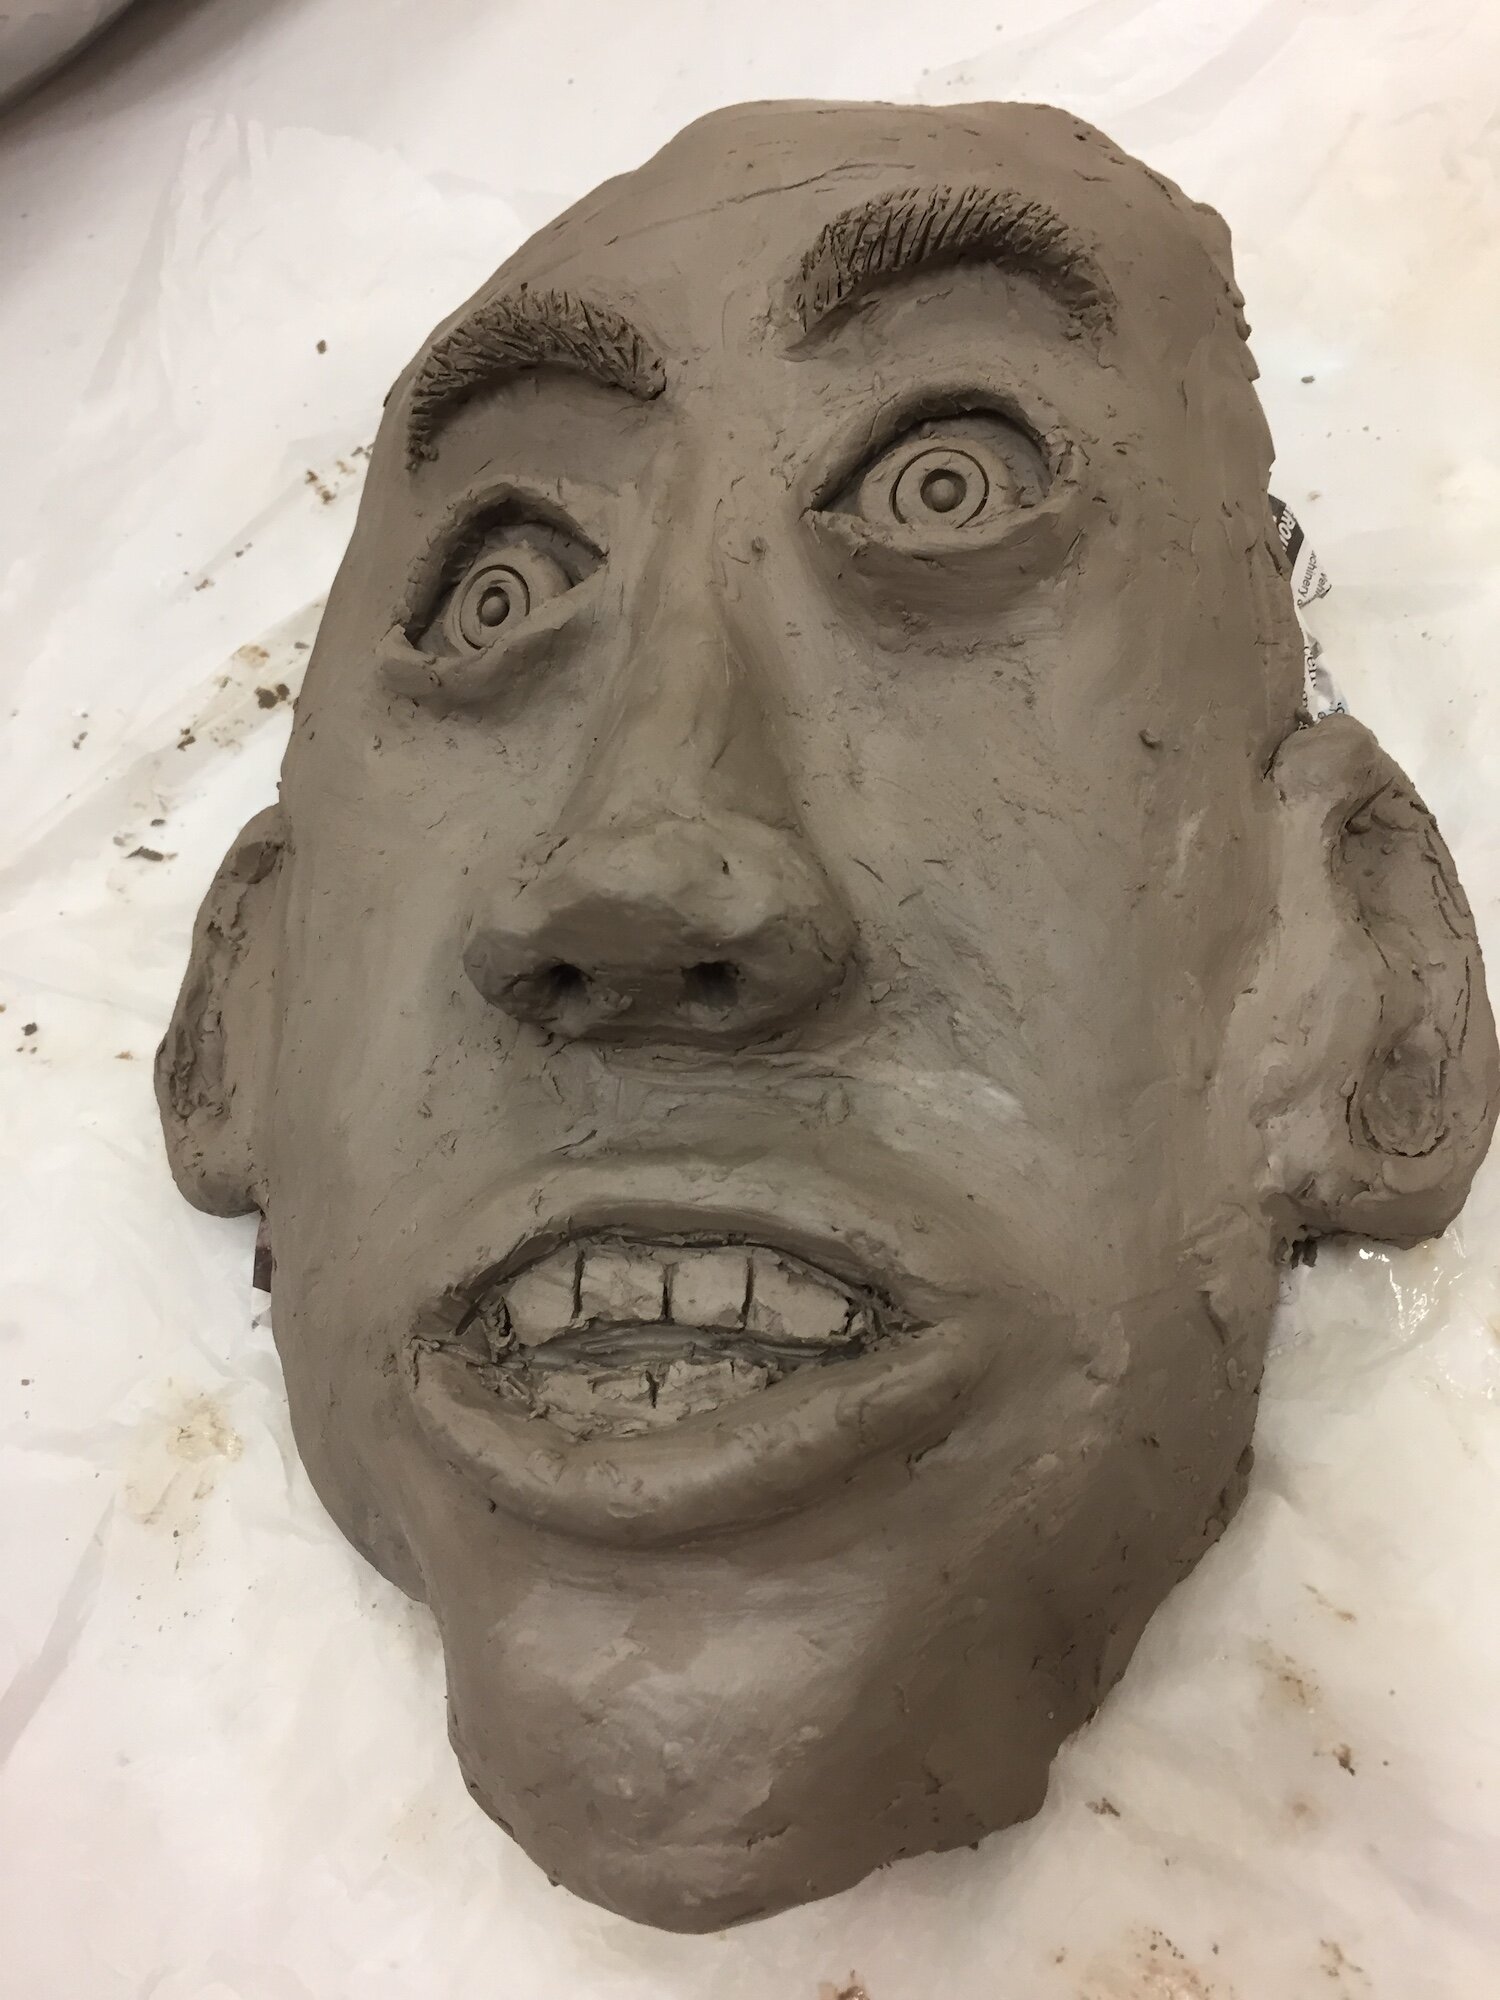 Professional Development Activity Away Day, Perth, Surprise Facial Expression of Emotion, Clay Sculpture